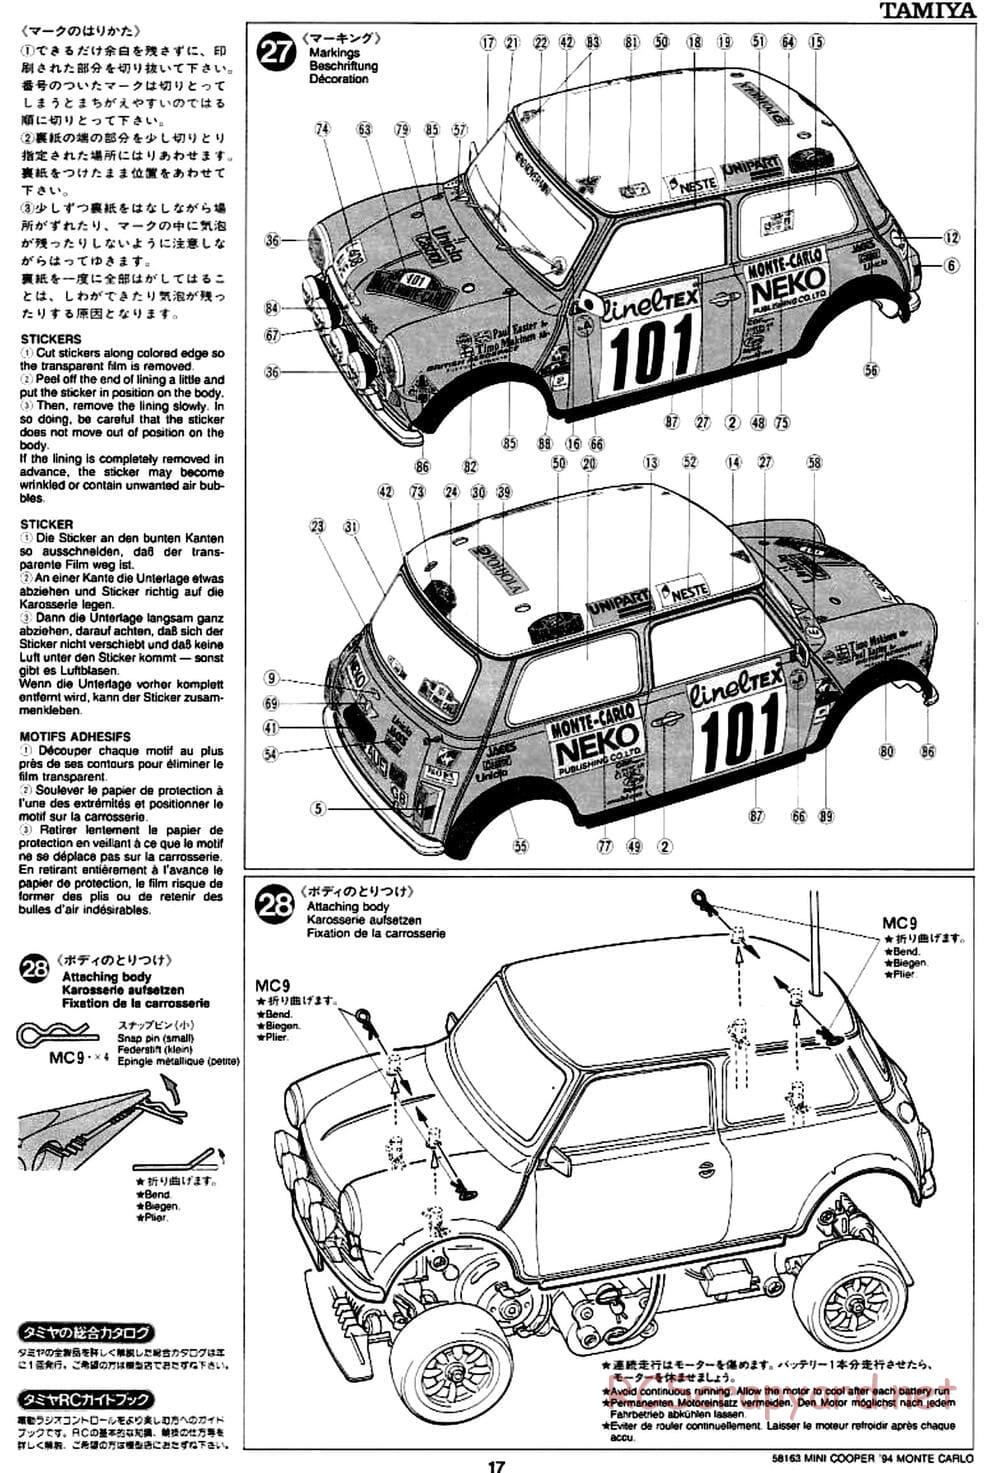 Tamiya - Rover Mini Cooper 94 Monte-Carlo - M01 Chassis - Manual - Page 17